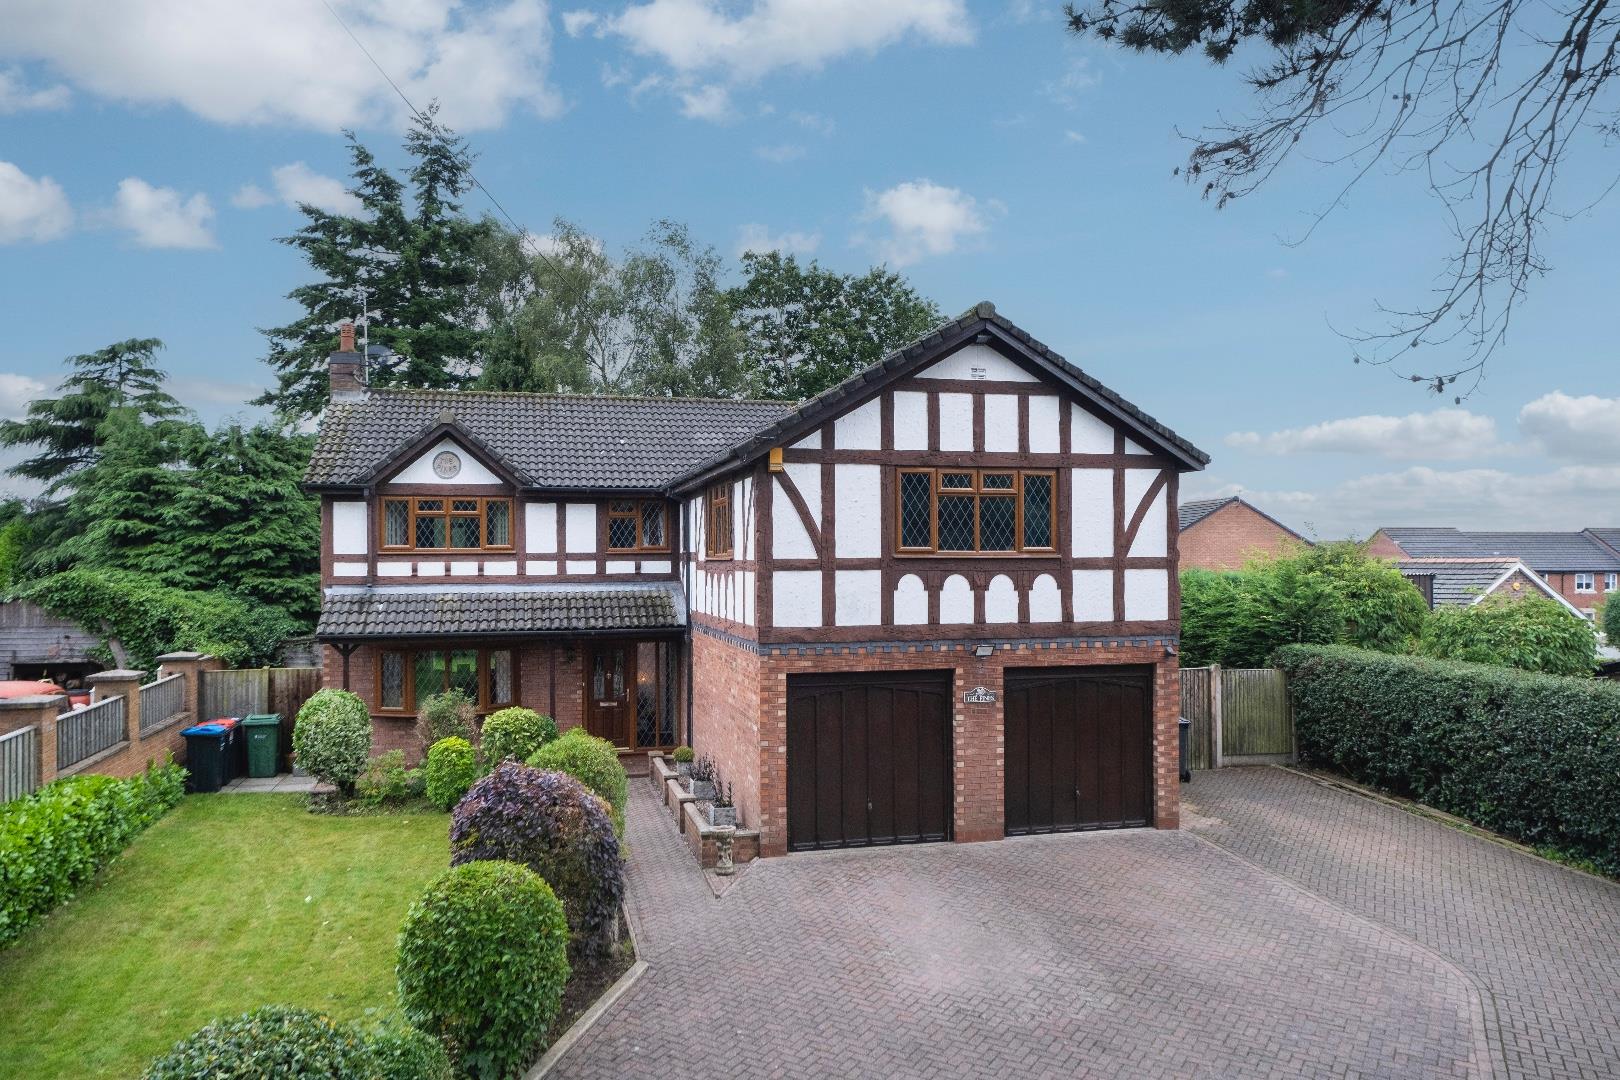 5 bedroom  Detached House for Sale in Winsford